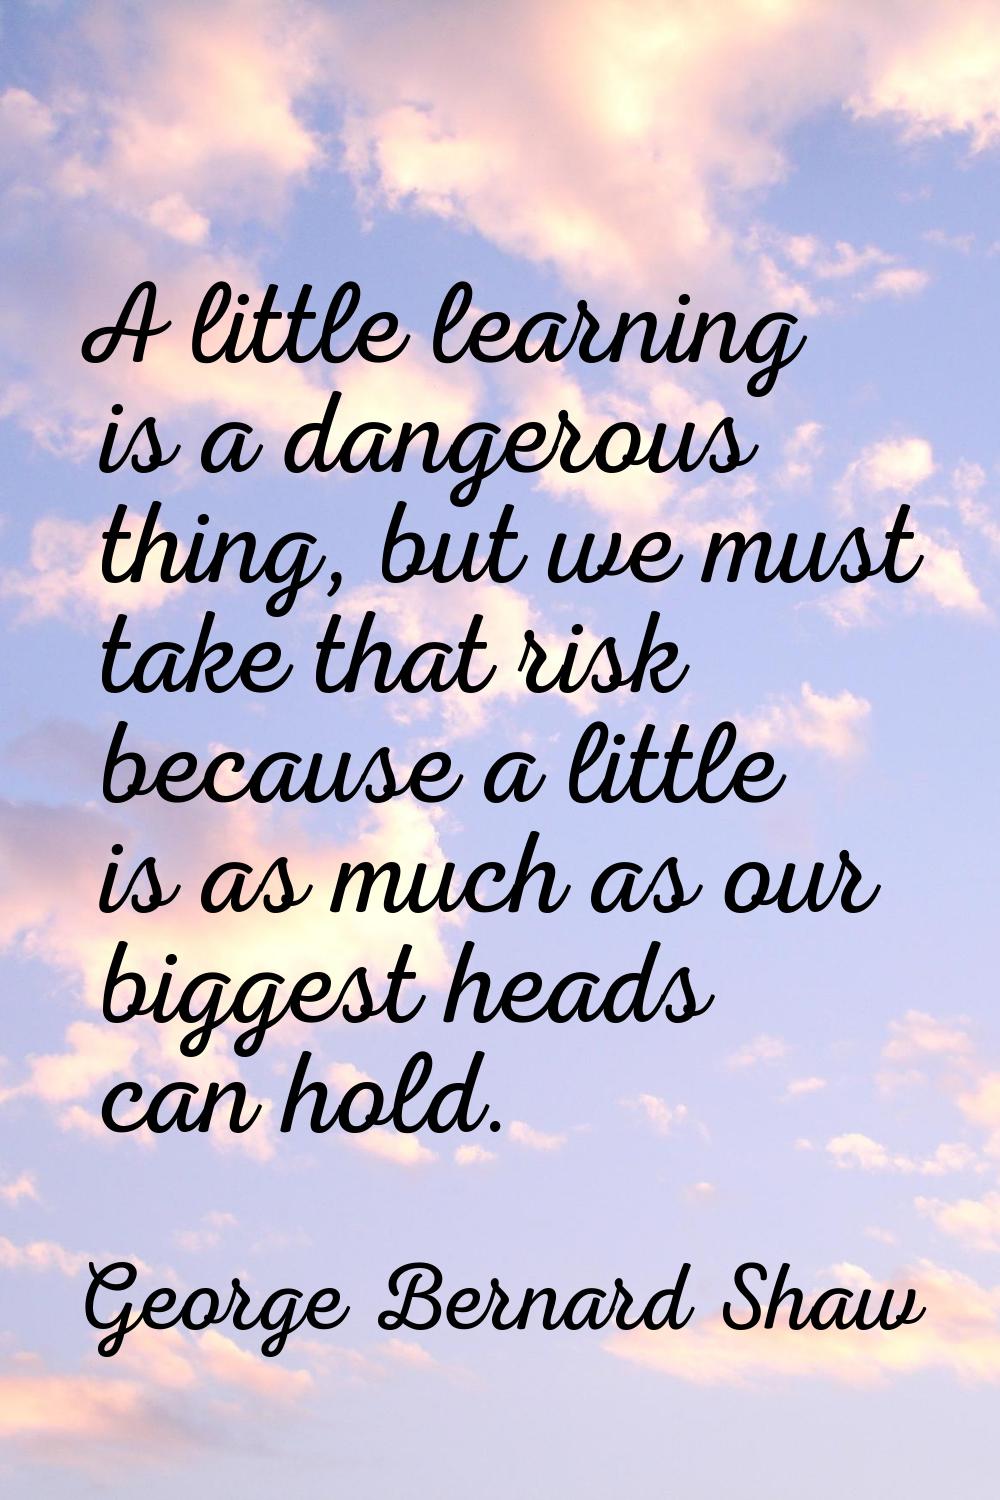 A little learning is a dangerous thing, but we must take that risk because a little is as much as o